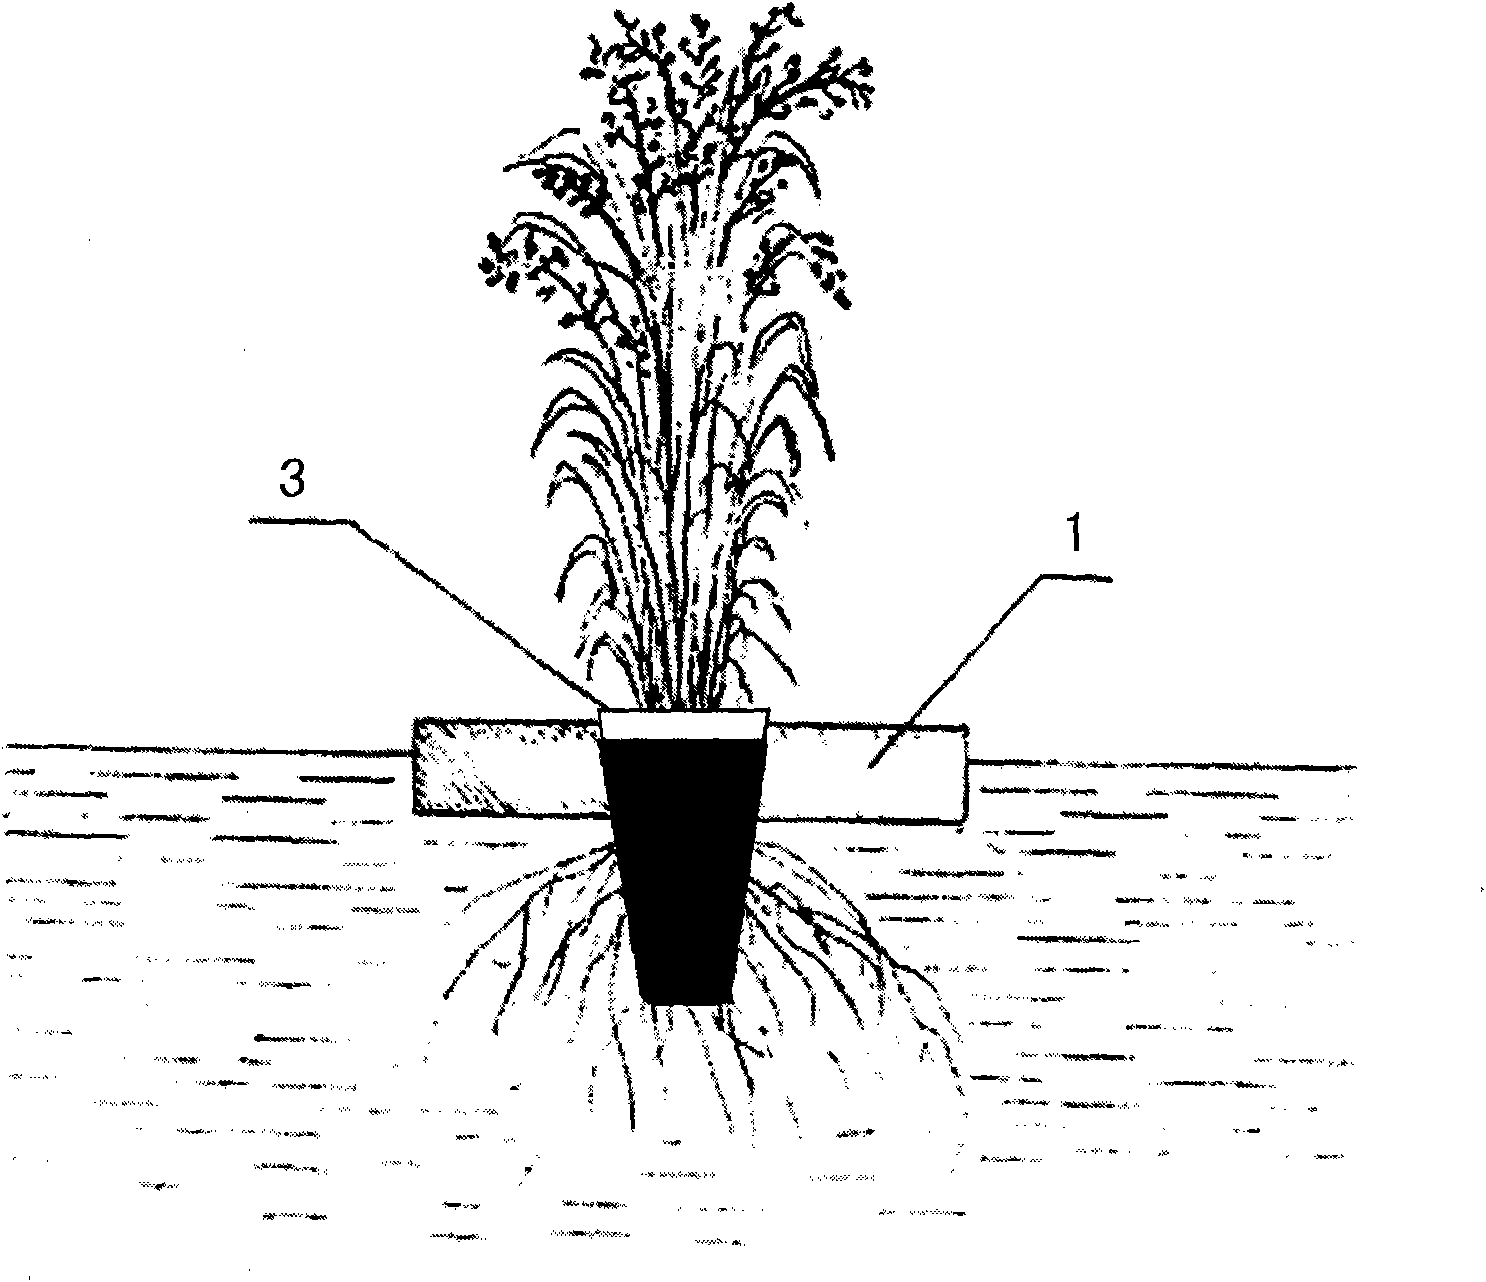 Water borne floating bed and rice planting method